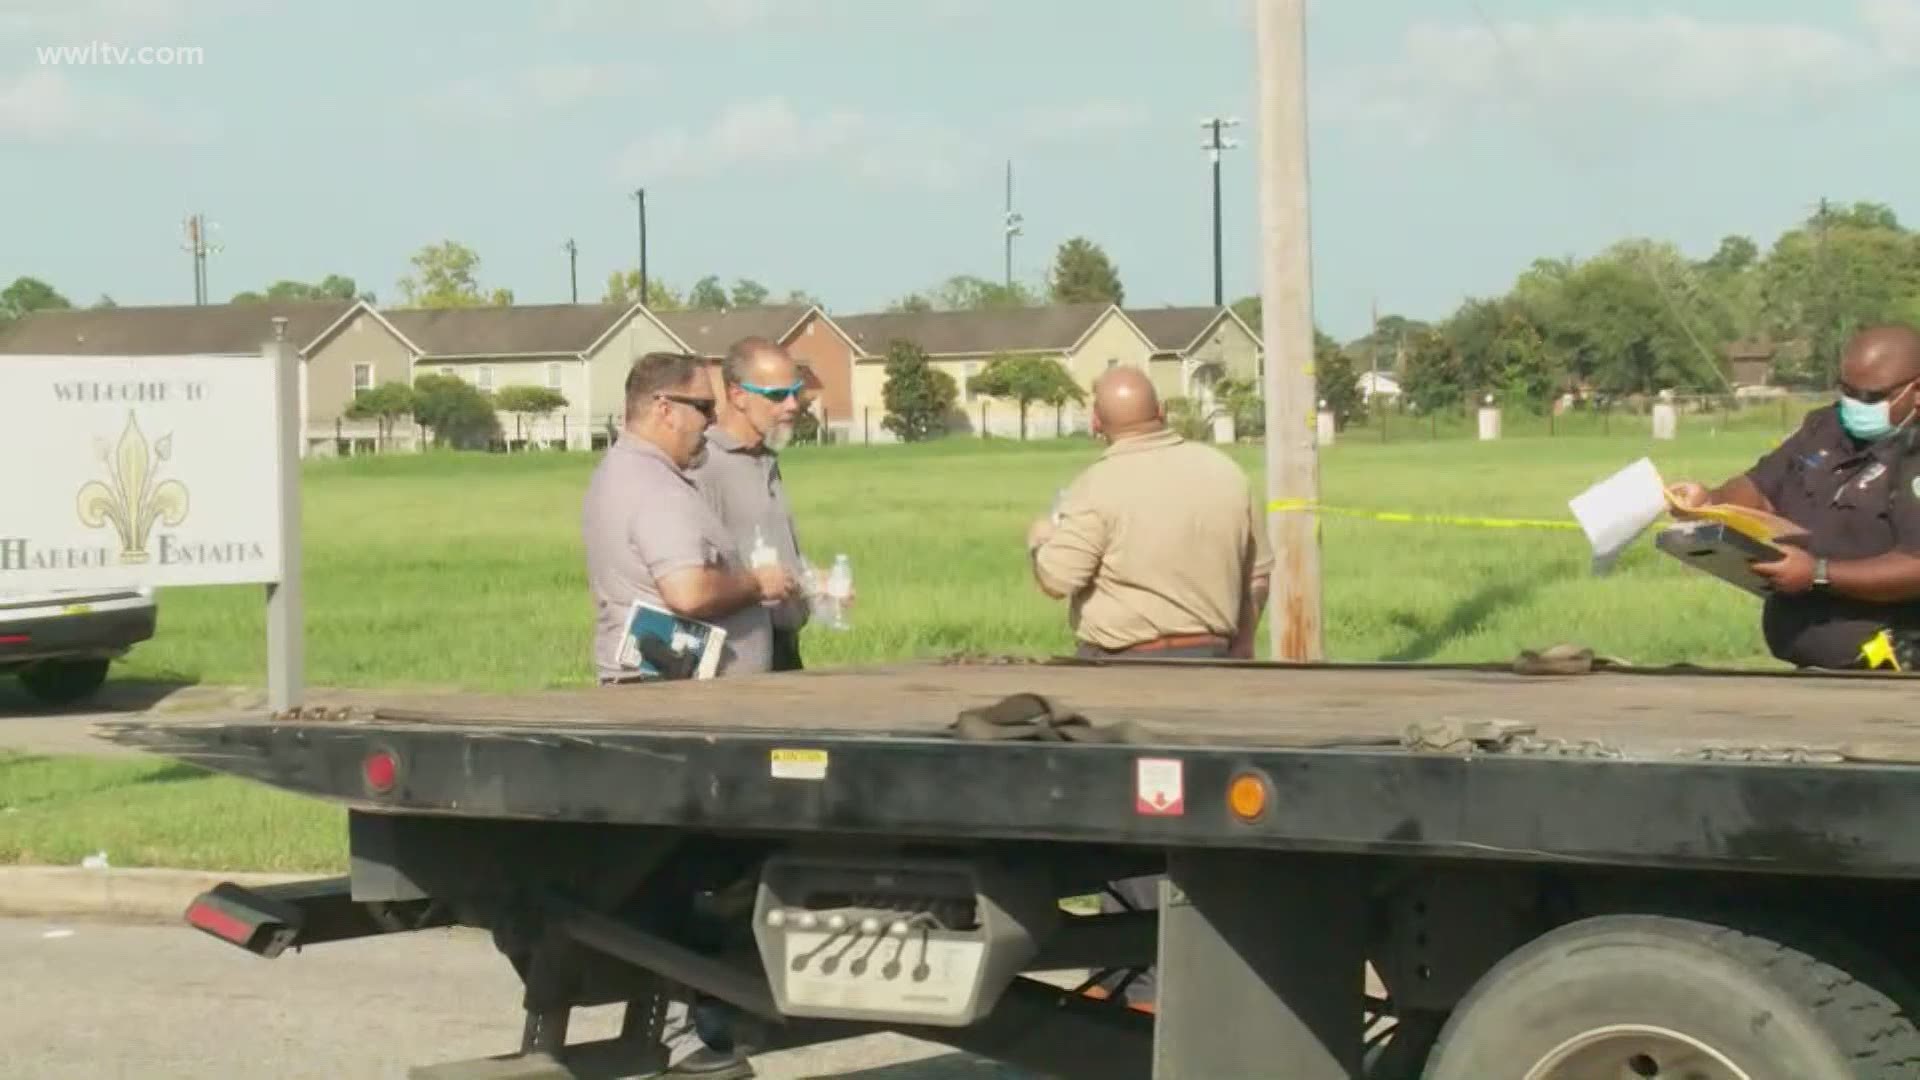 A man on a motorcycle was shot several times and died after an incident on the west bank of Jefferson Parish.